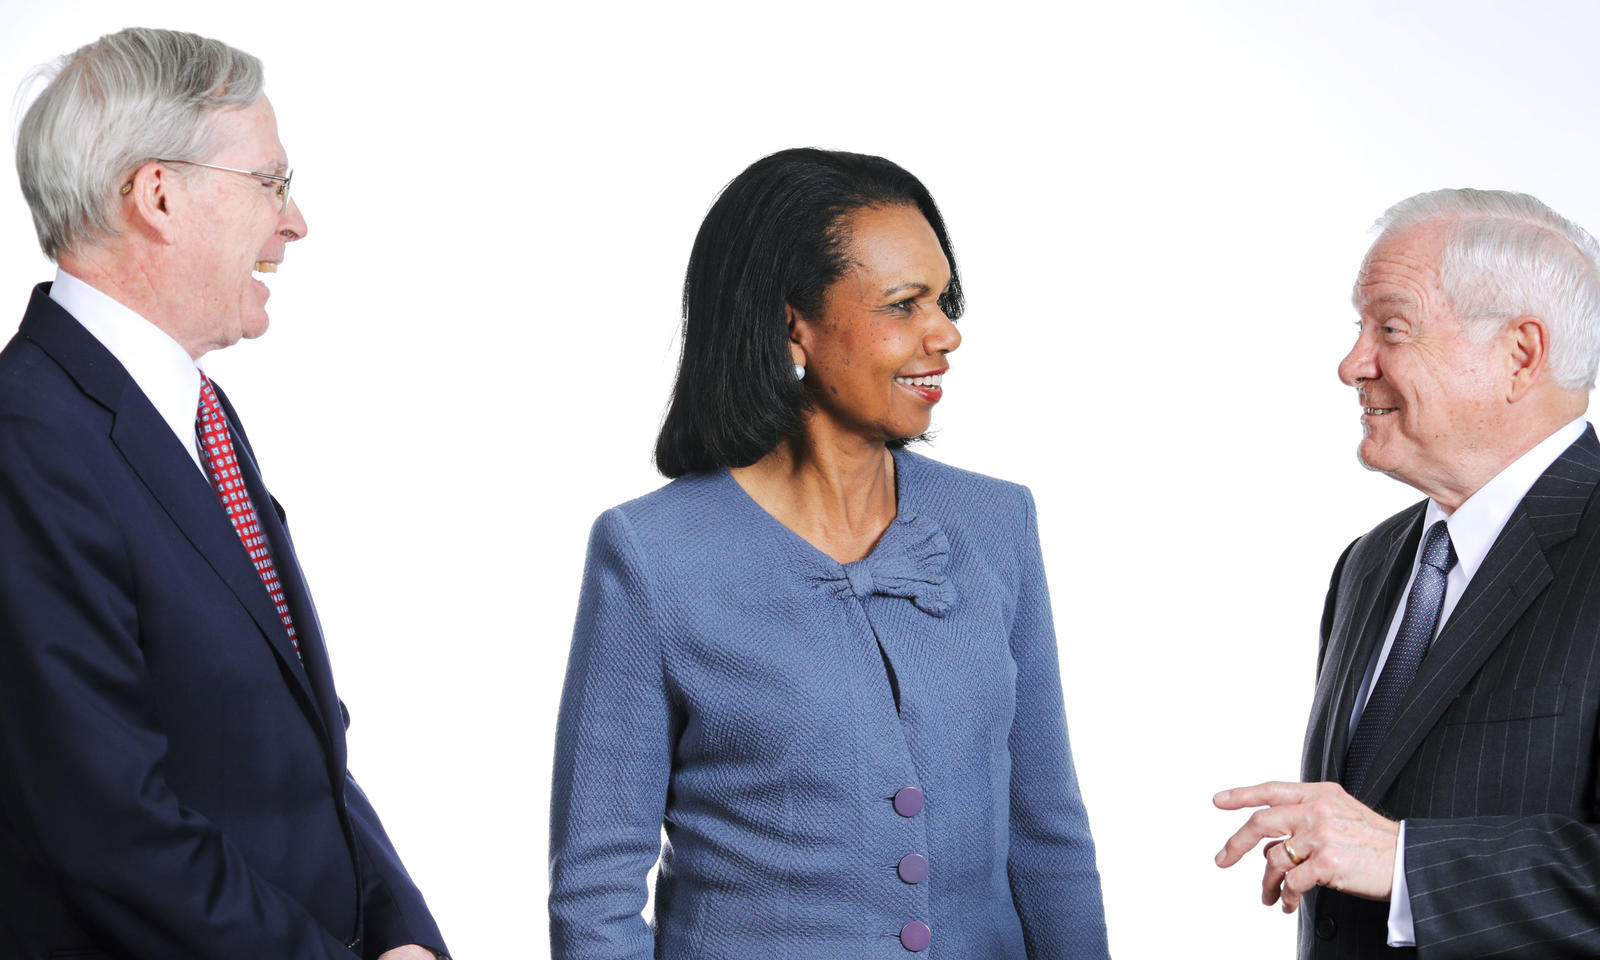 Stephen Hadley, Condoleeza Rice, and Robert Gates talking to each other